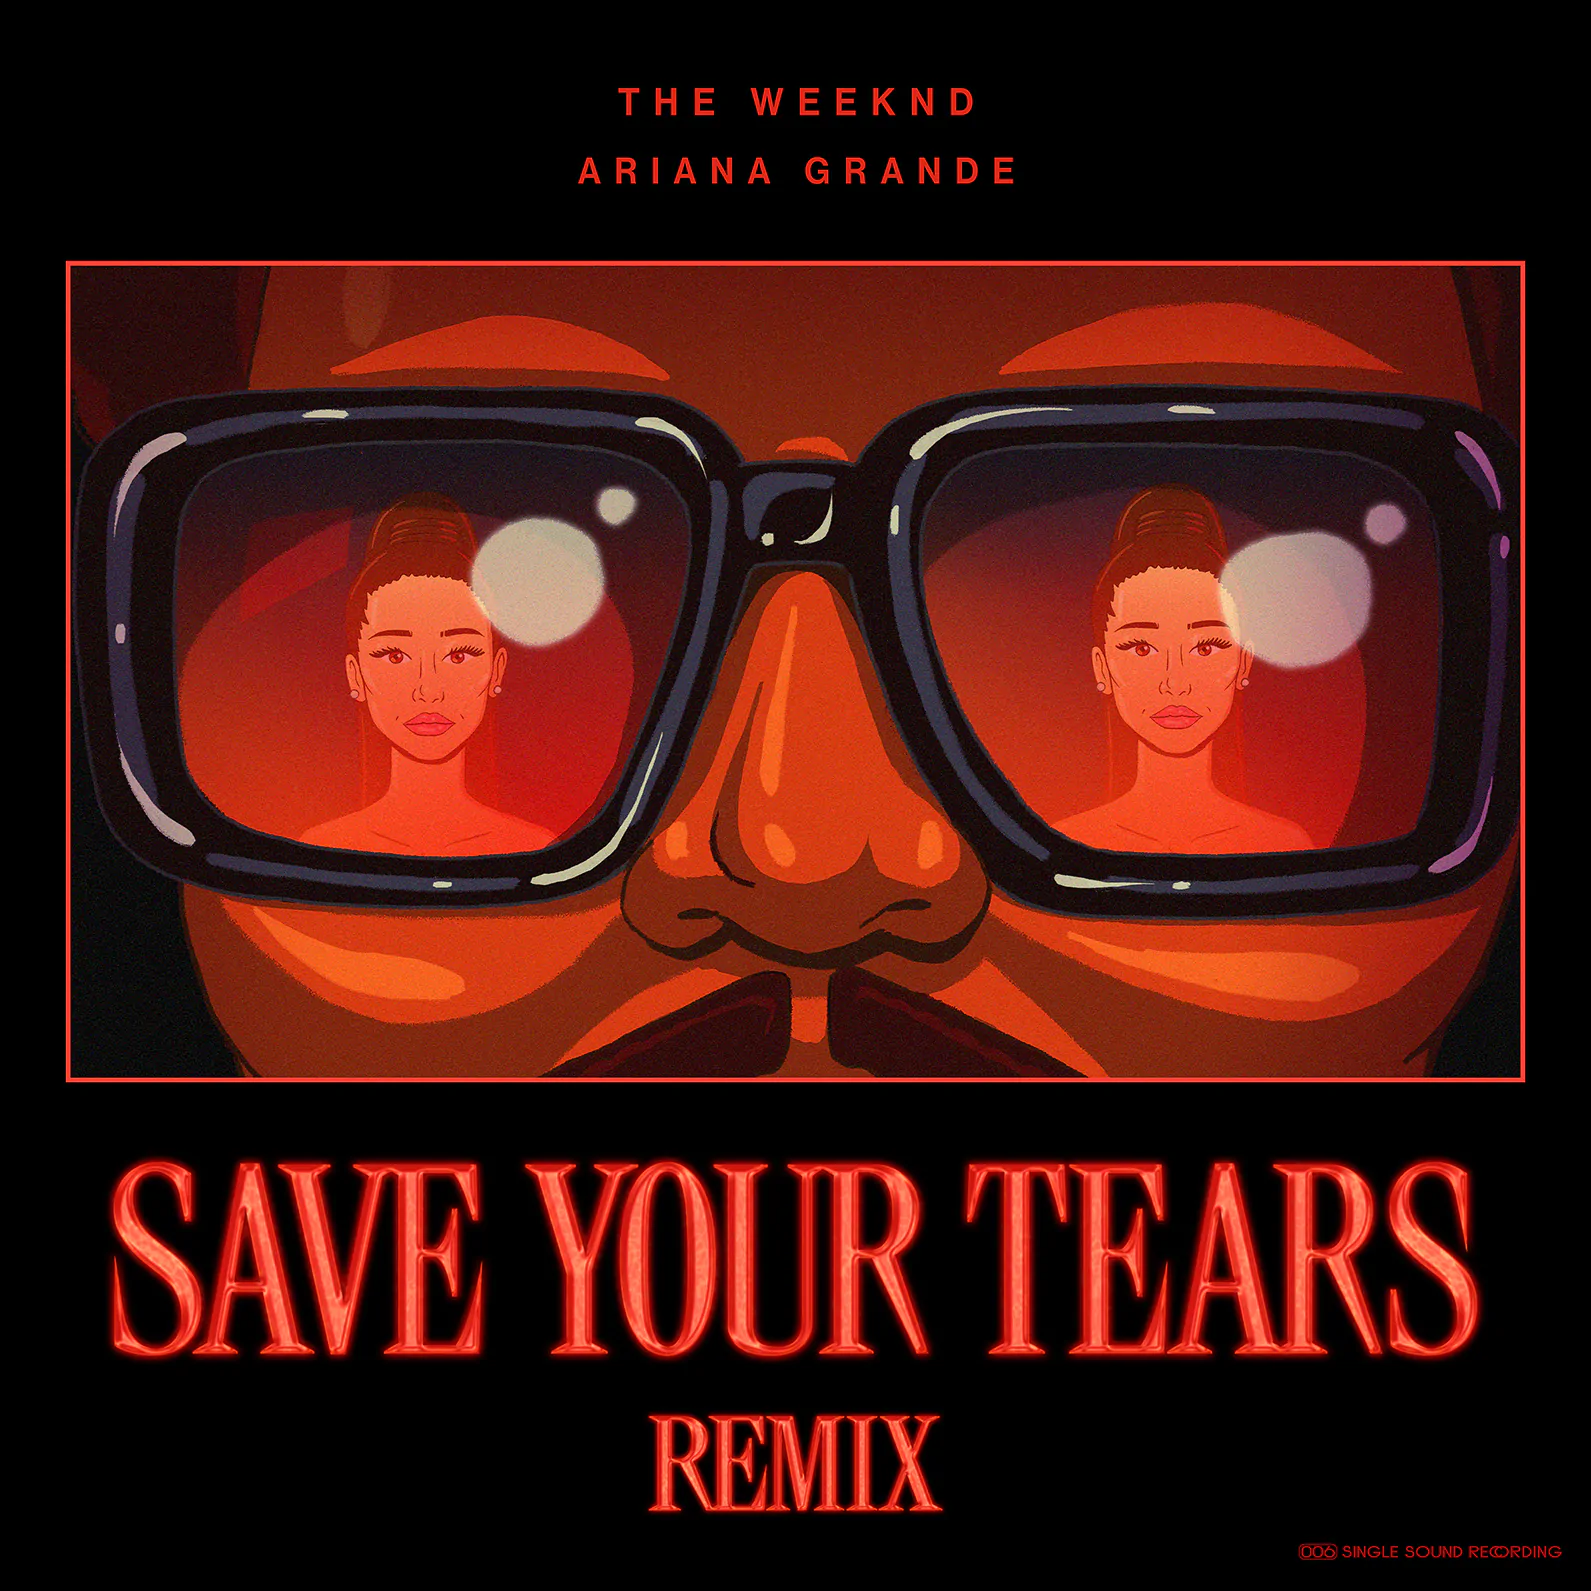 THE WEEKND shares ‘Save Your Tears Remix’ video featuring Ariana Grande